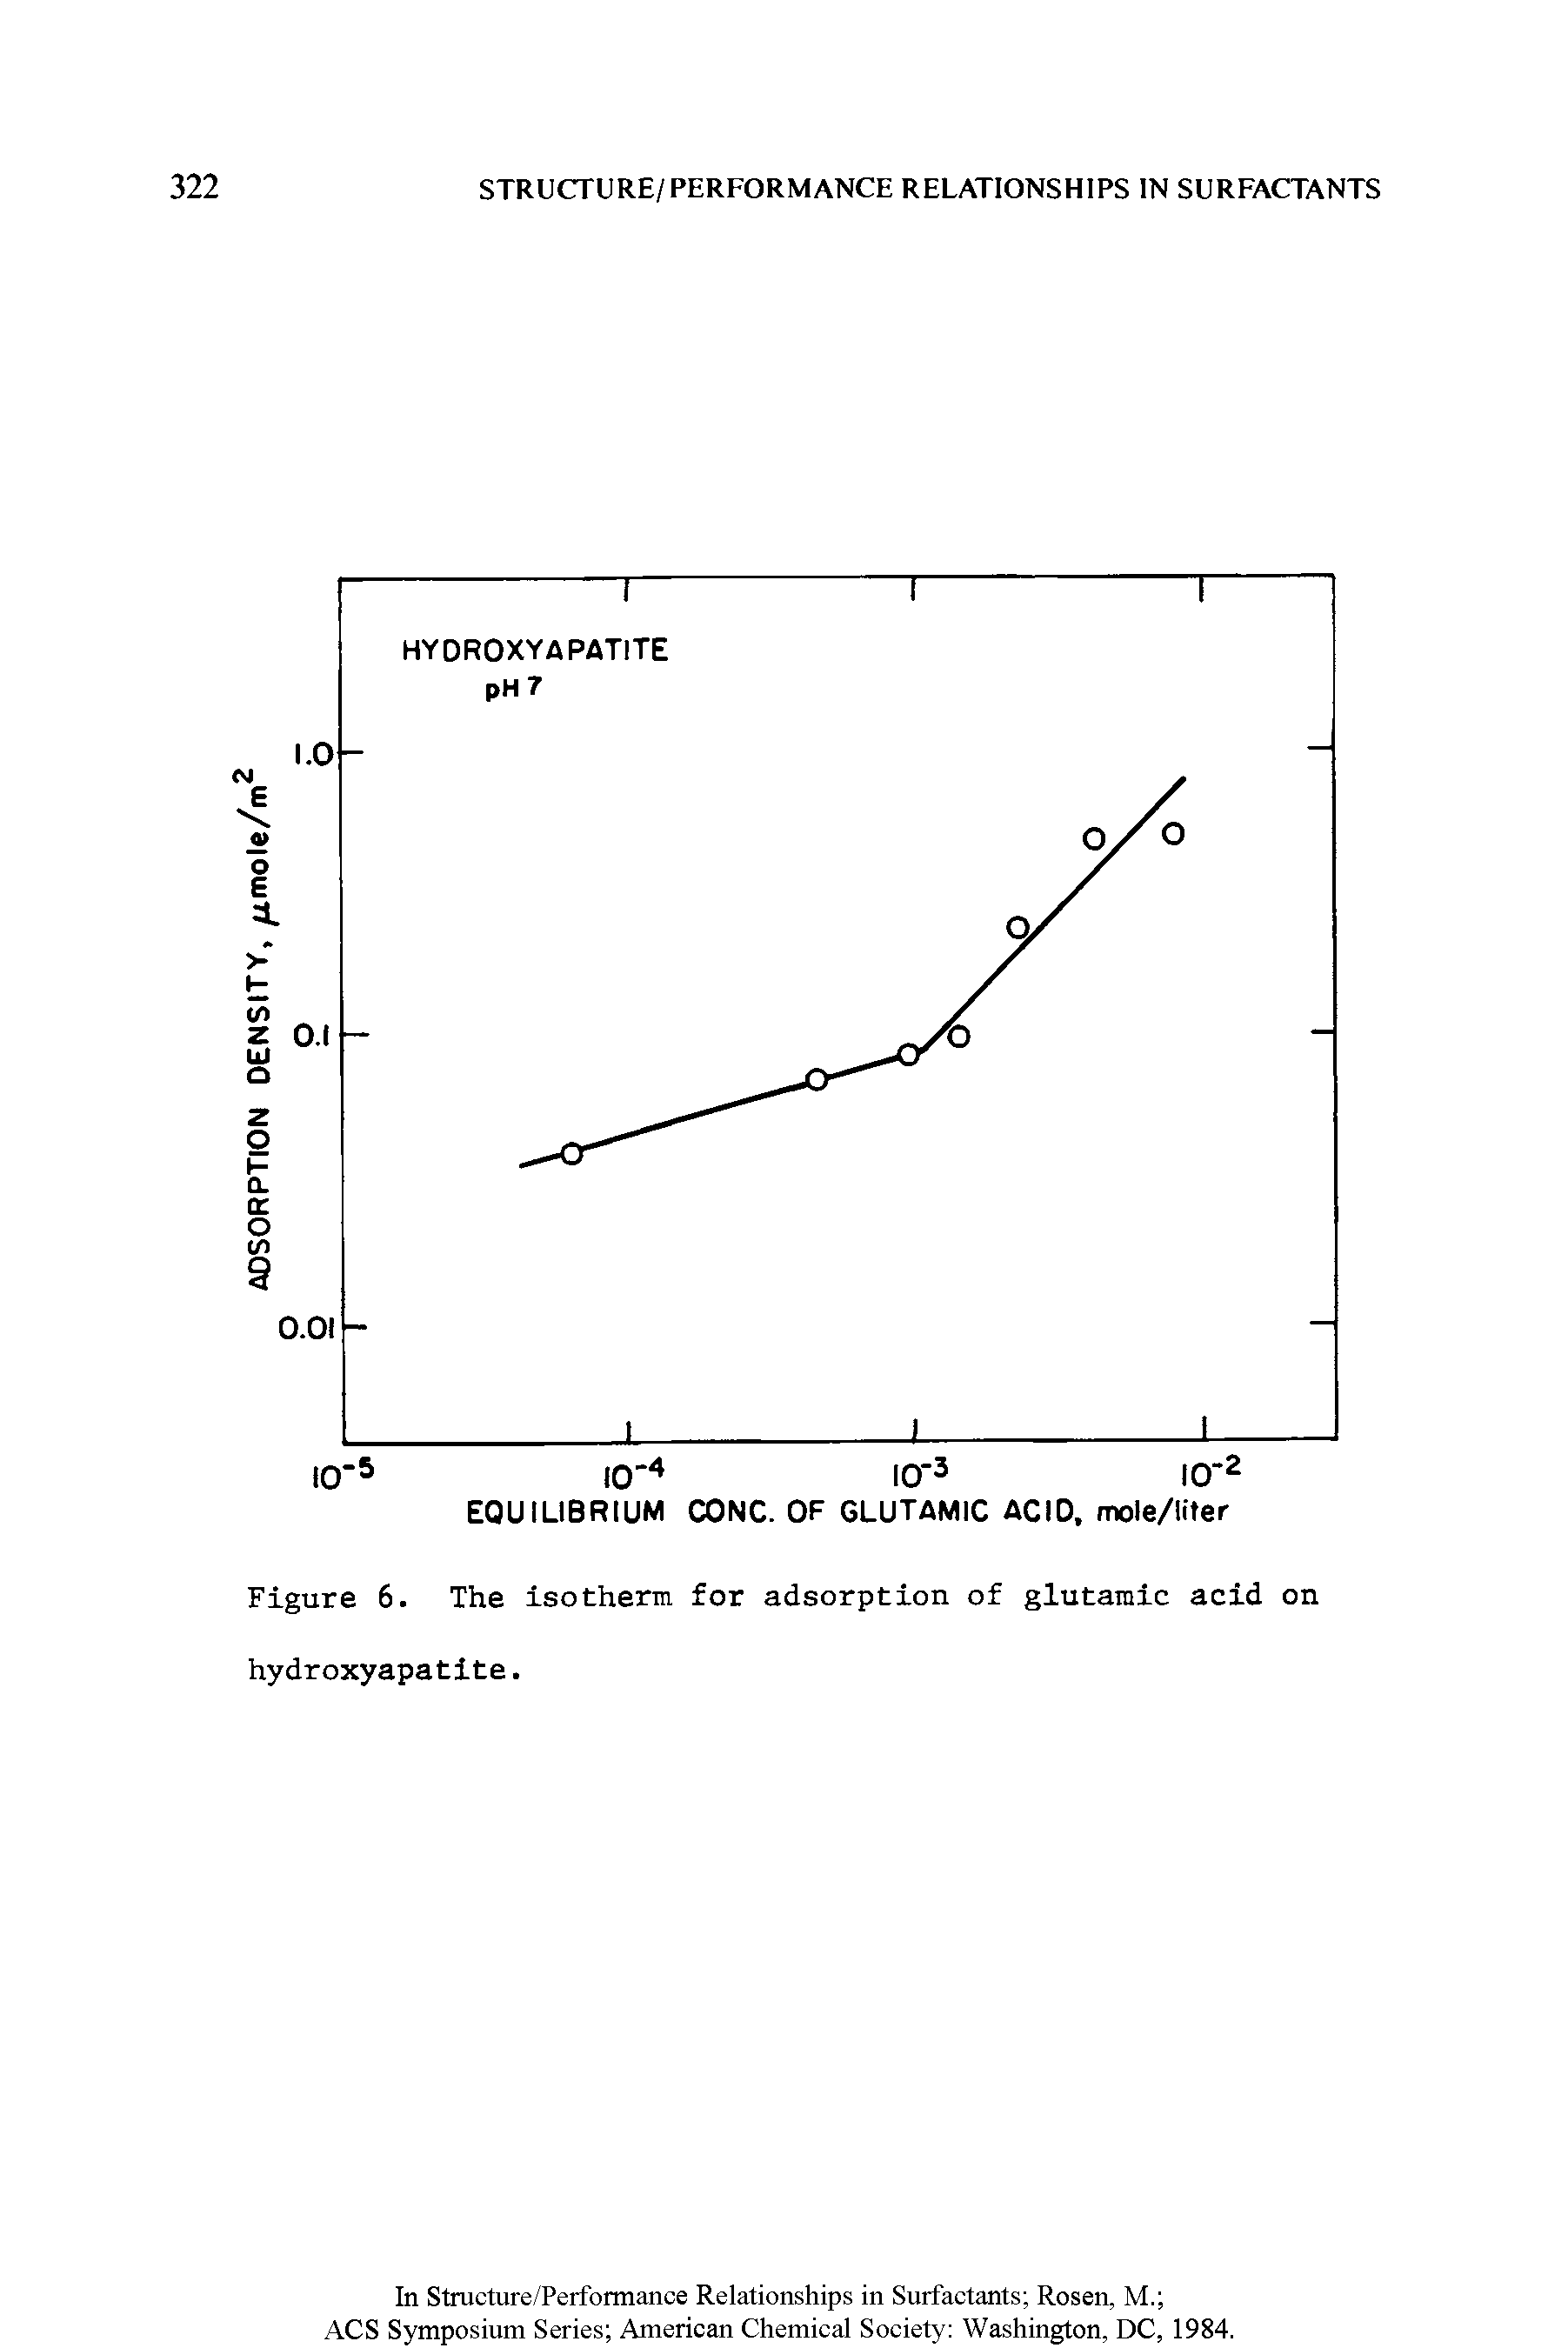 Figure 6. The isotherm for adsorption of glutamic acid on hydroxyapatite.